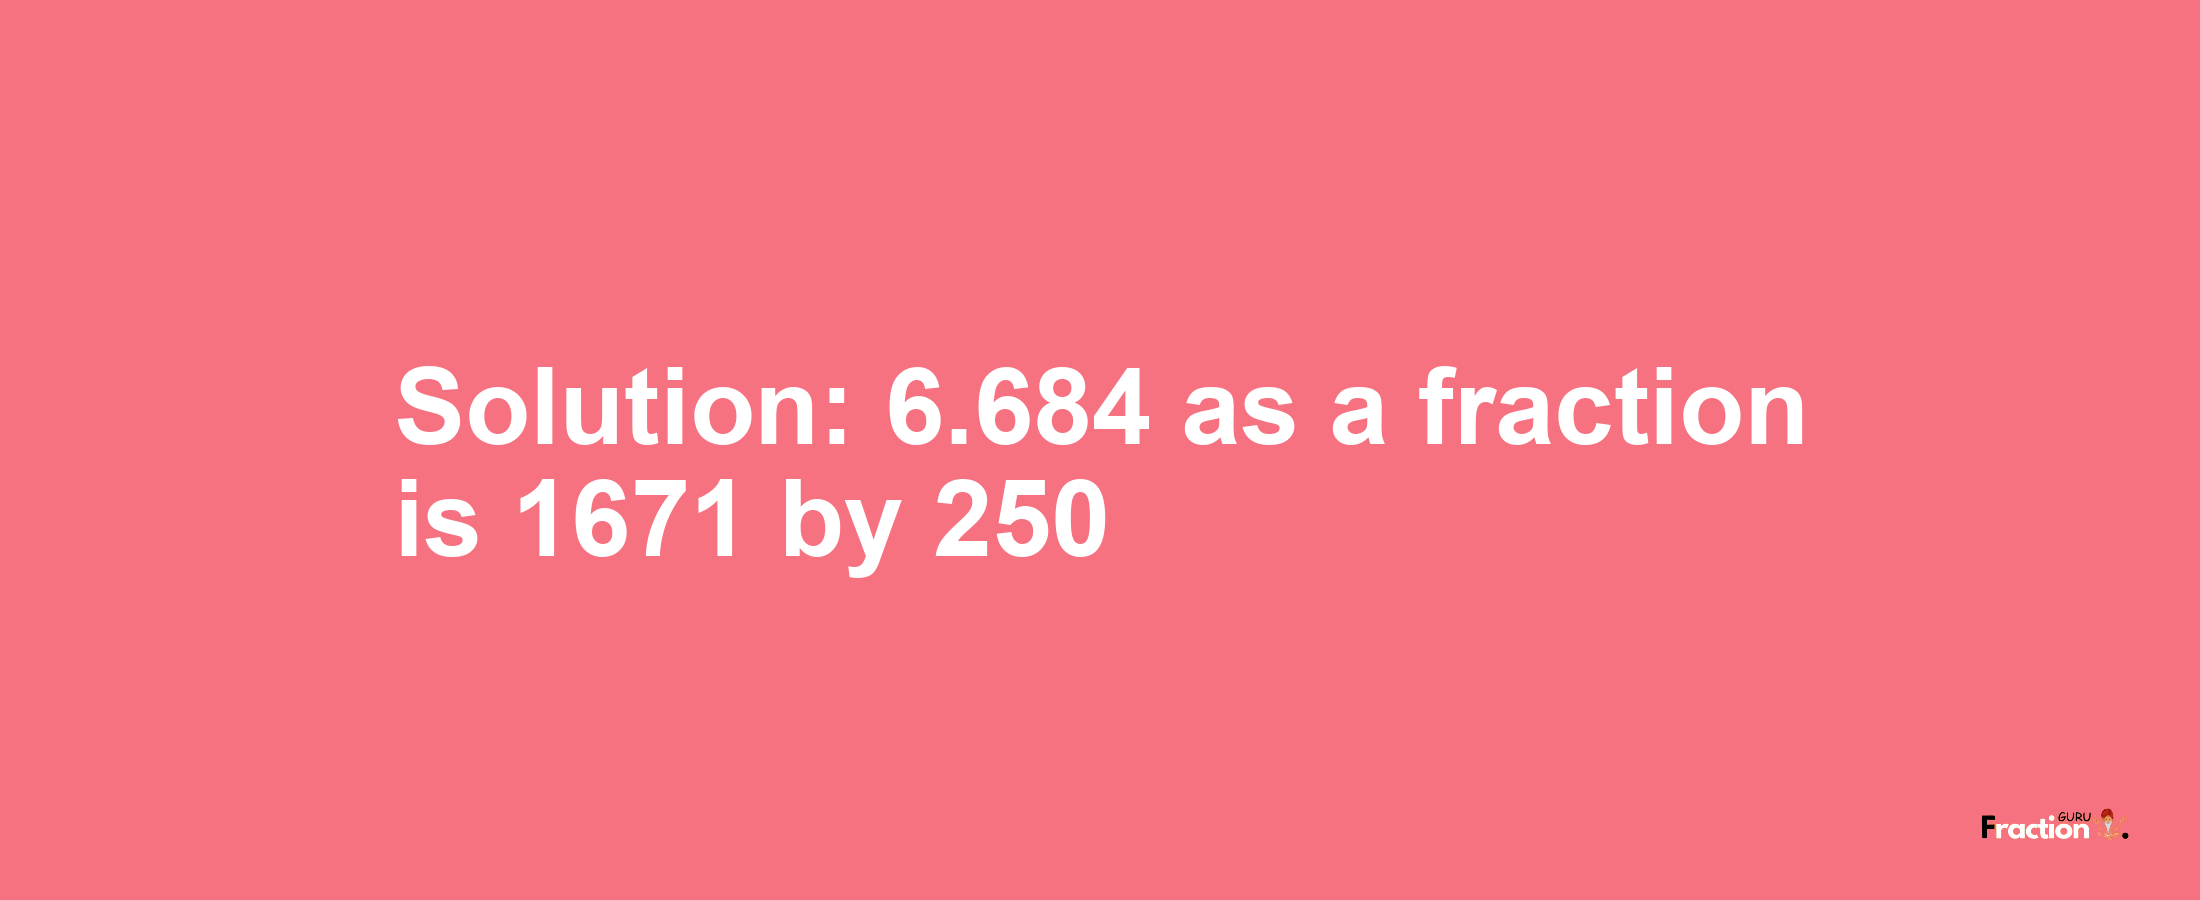 Solution:6.684 as a fraction is 1671/250